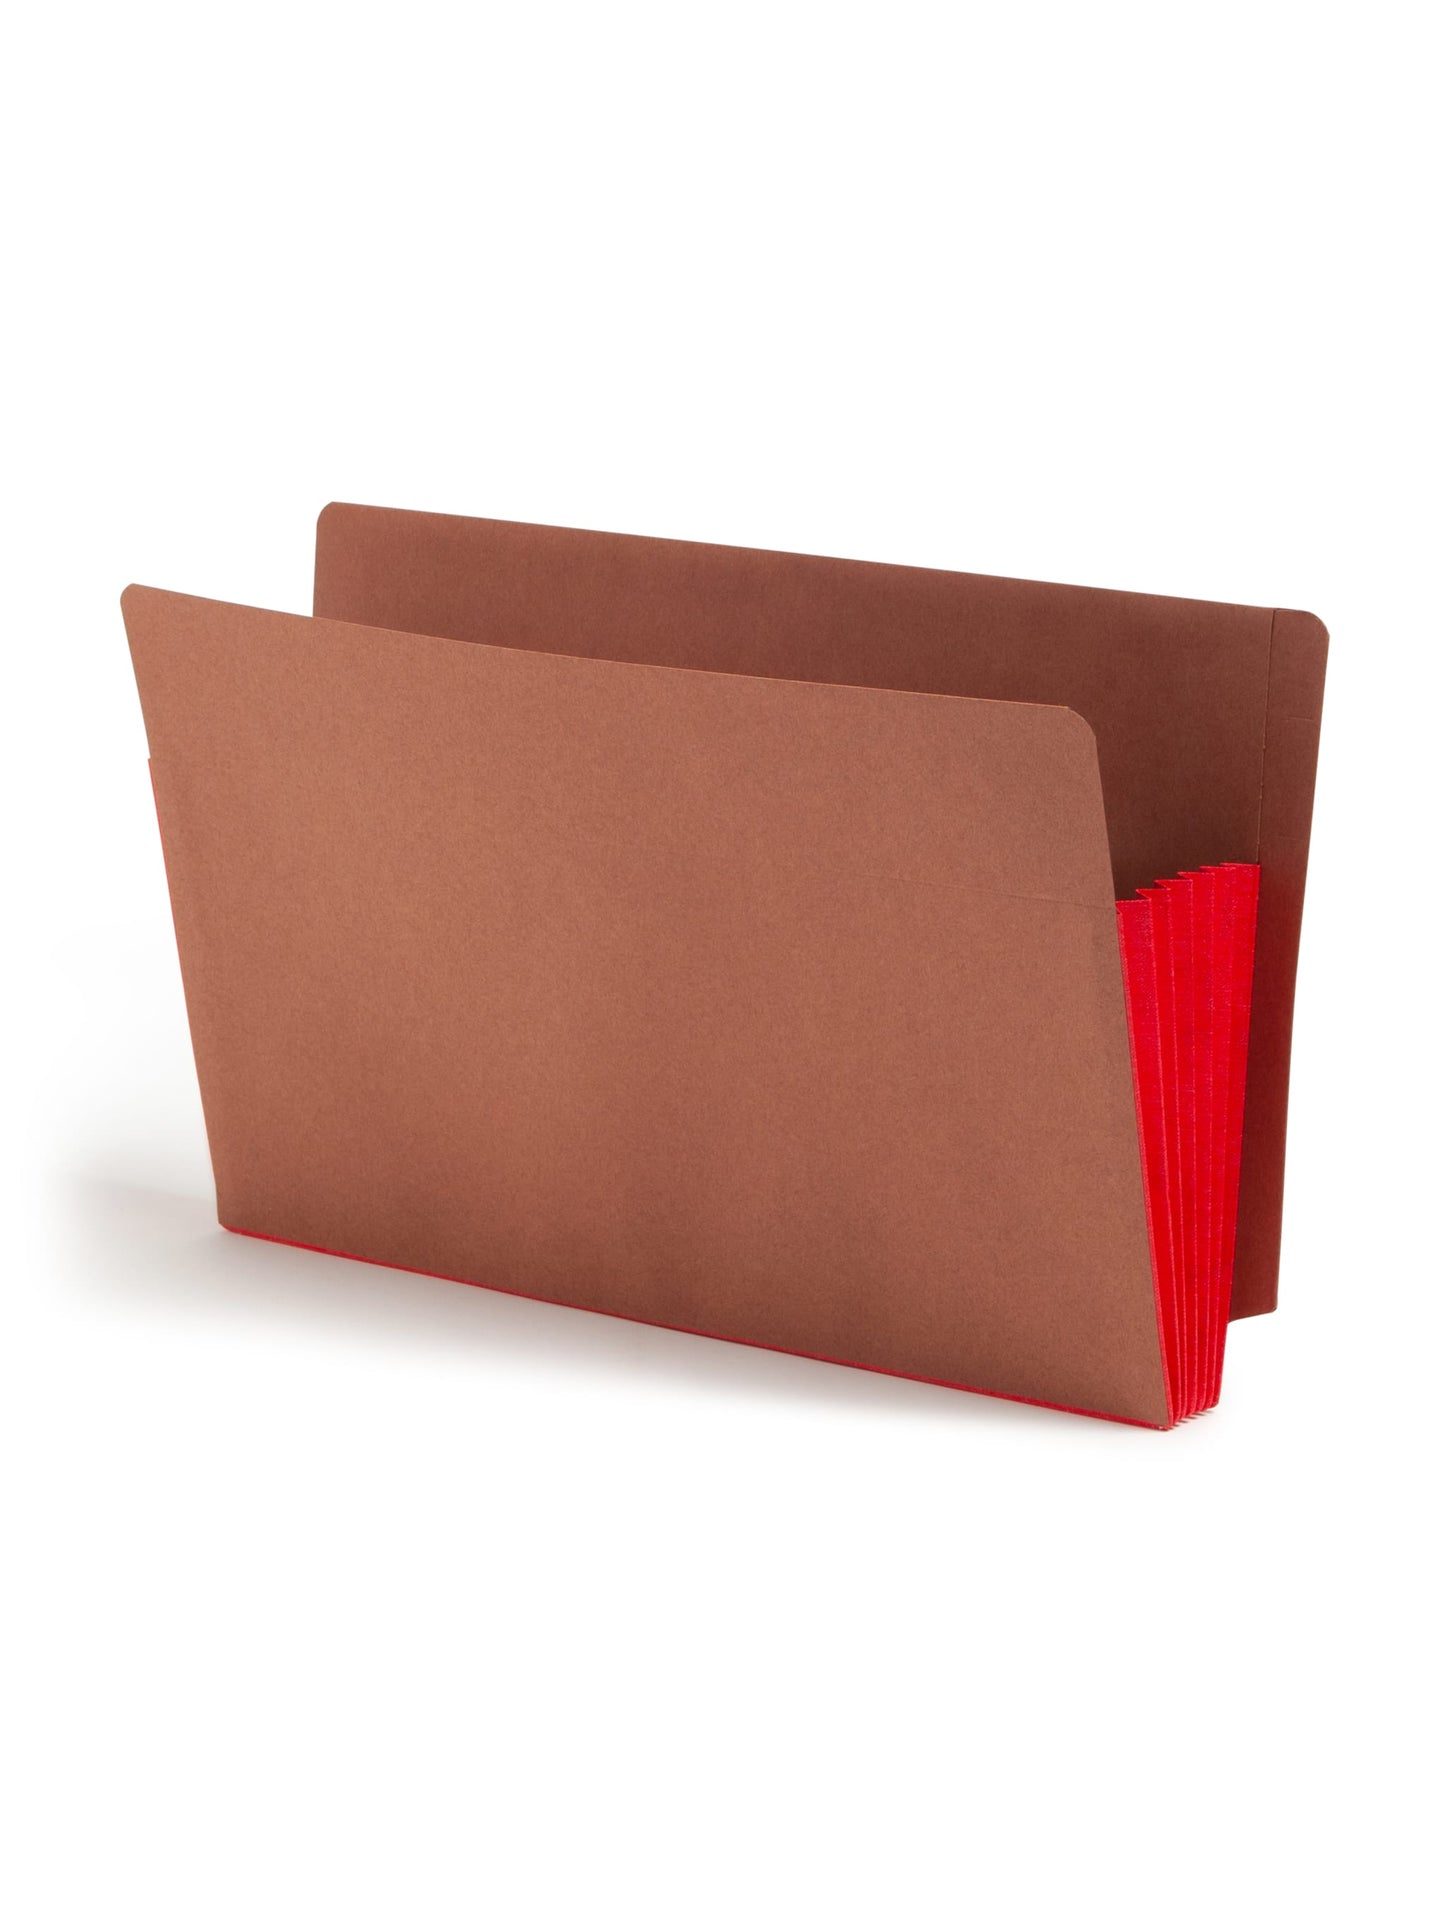 Reinforced End Tab File Pockets, Straight-Cut Tab, 5-1/4 inch Expansion, Red Color, Extra Wide Legal Size, Set of 0, 30086486746961